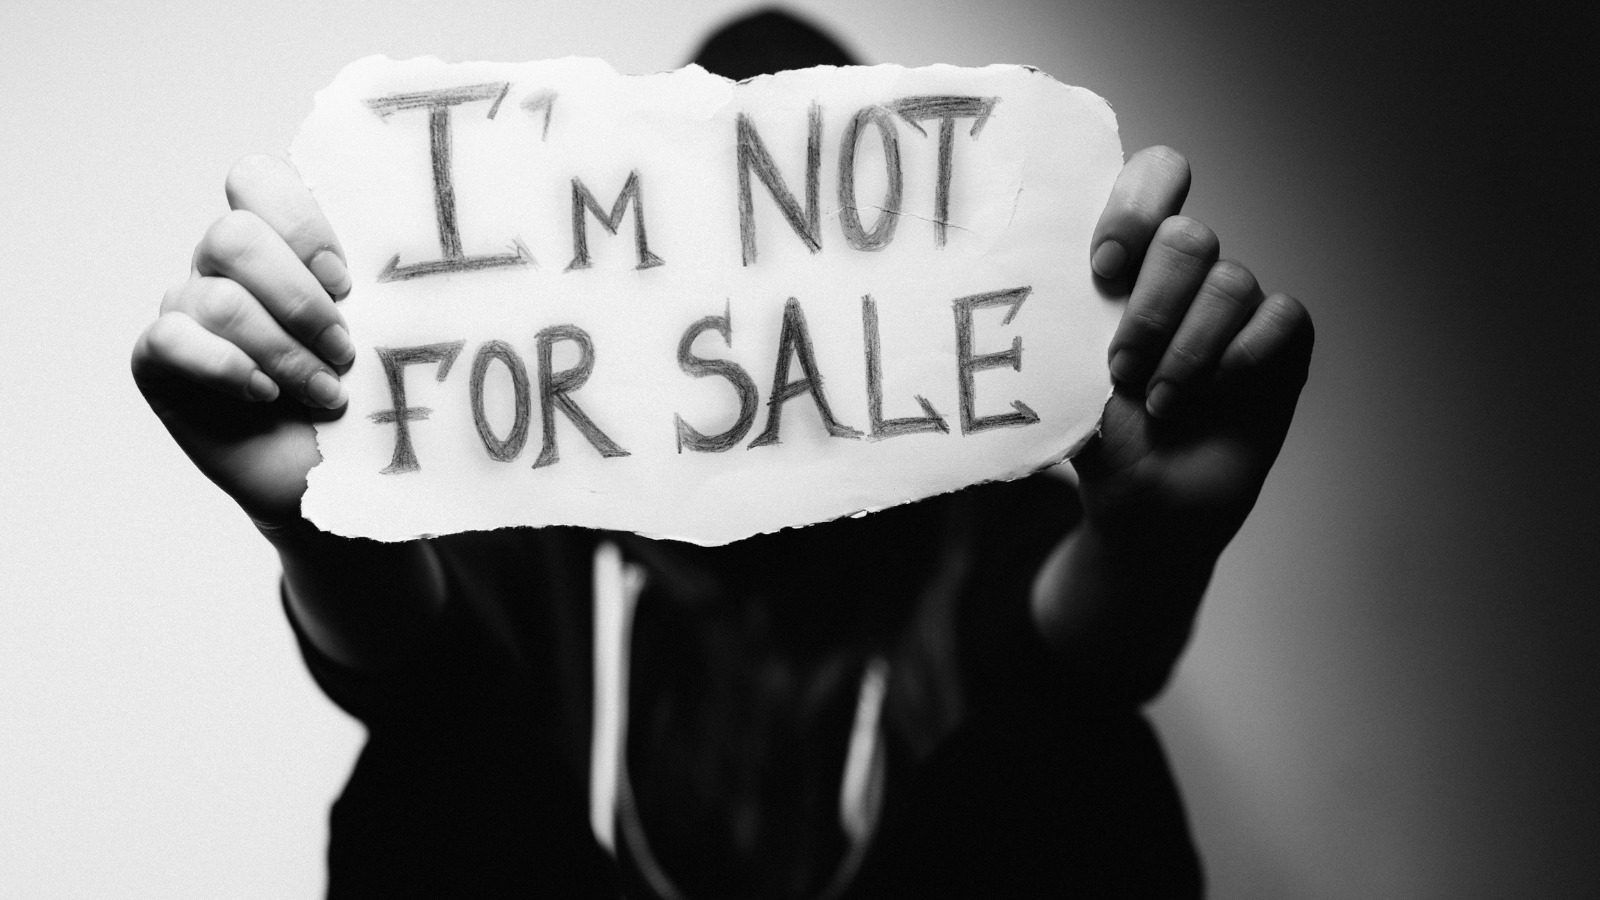 Not for sale: How the Church is working to end trafficking